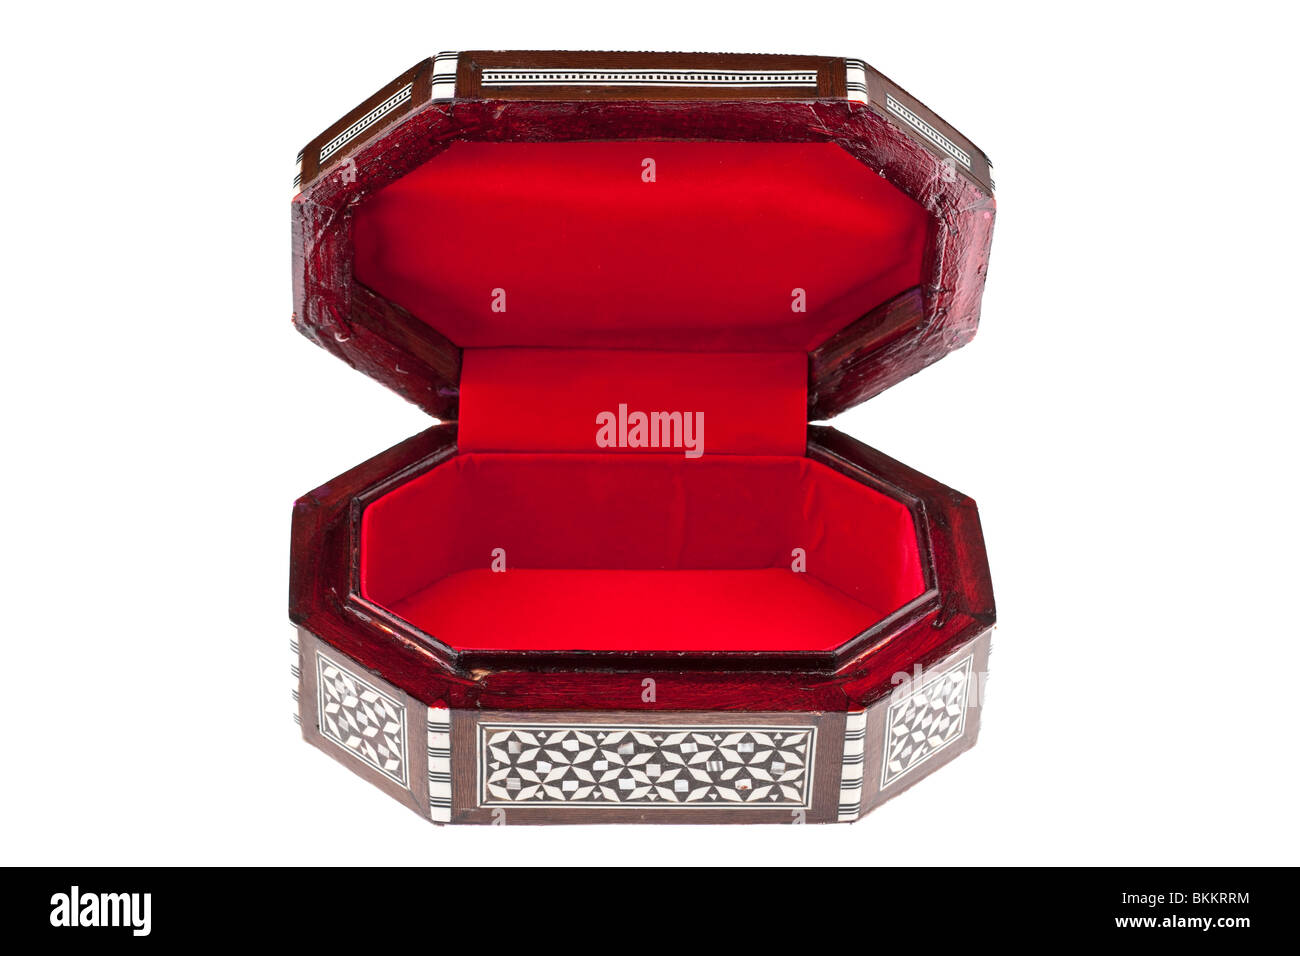 Eight sided red velvet lined jewelry box Stock Photo - Alamy